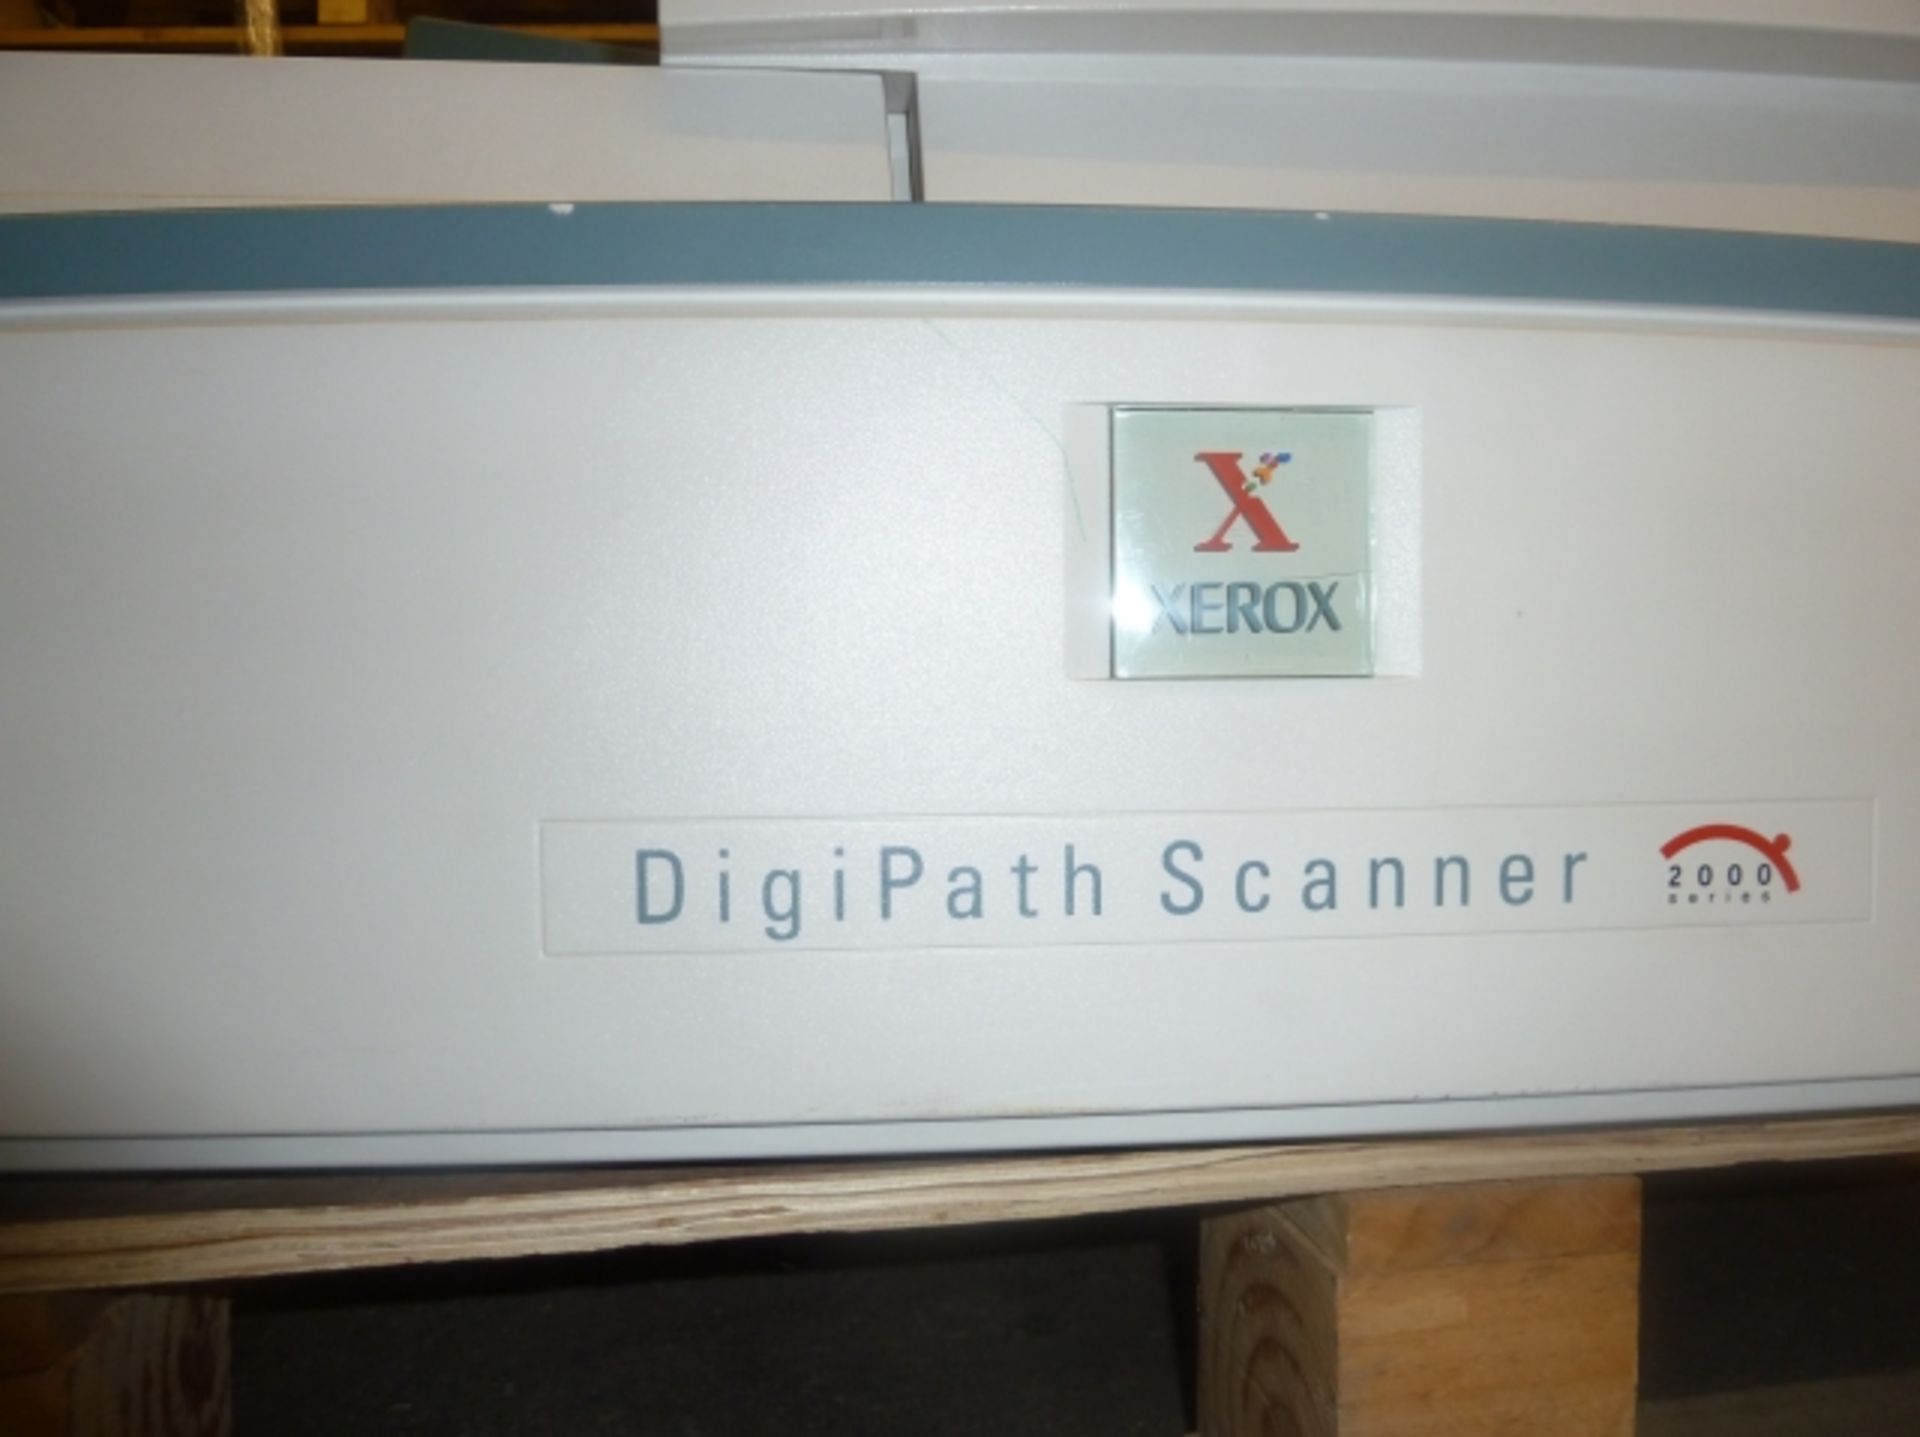 * Xerox 2000 Series EF6 Digipath Scanner. The council will remove the scanner from their building - Image 8 of 9